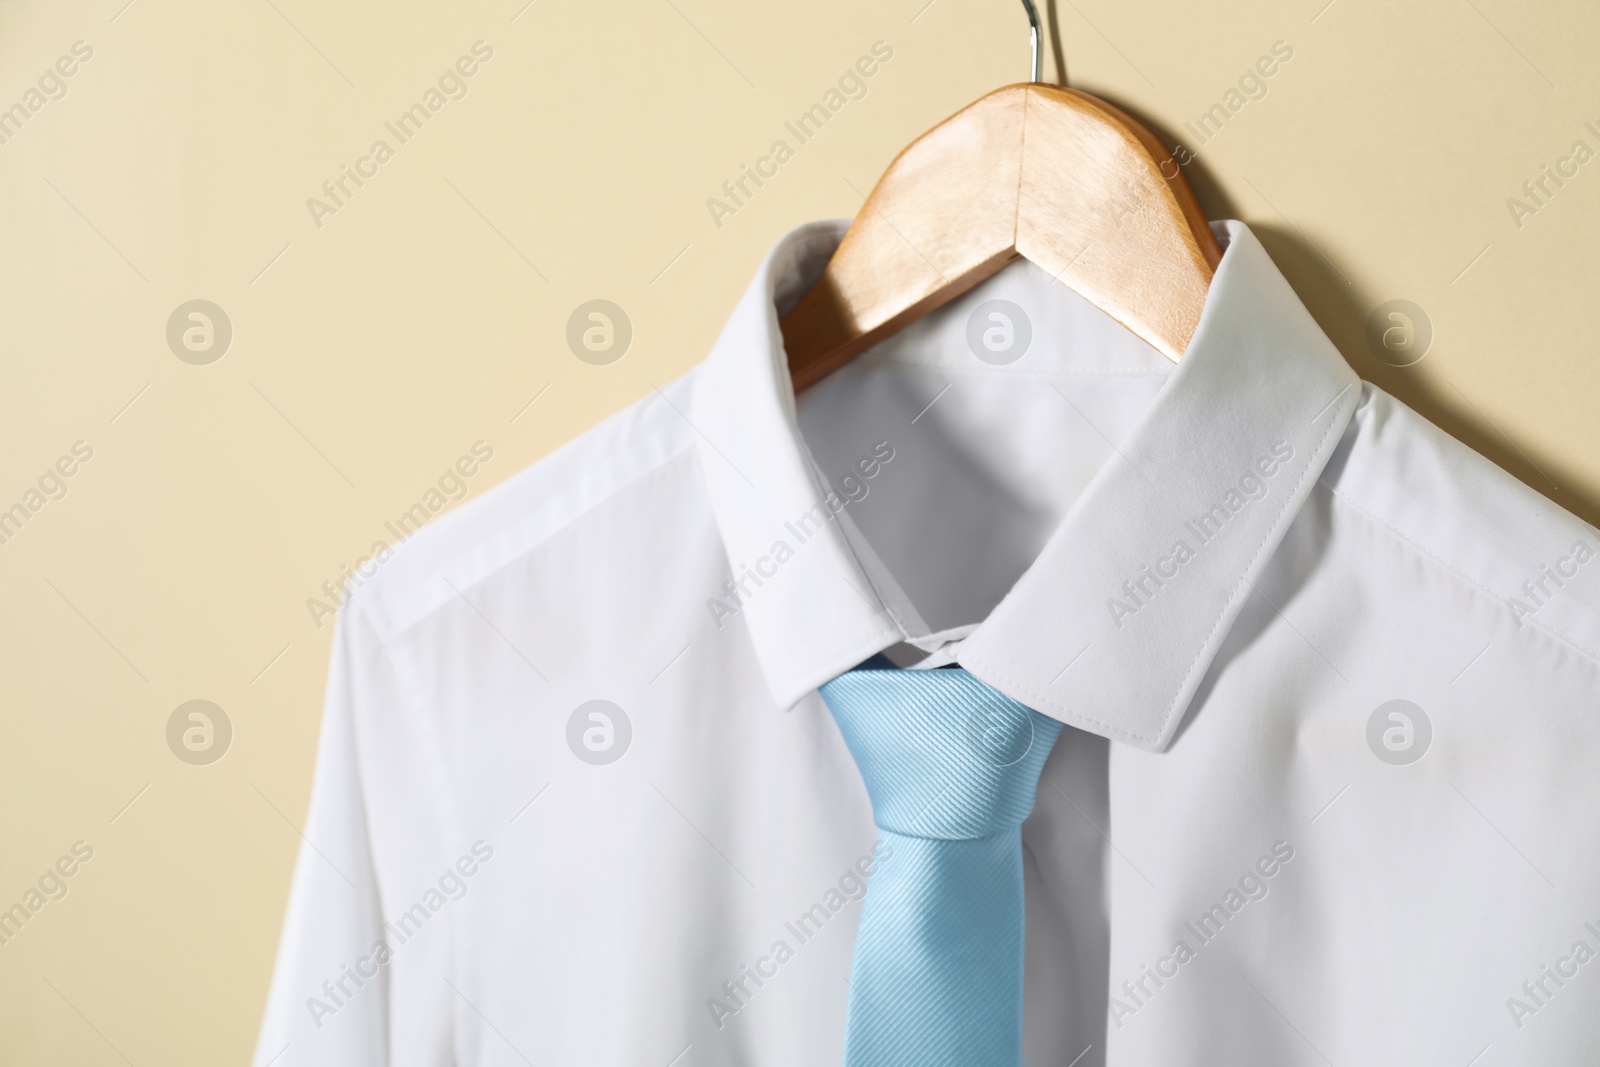 Photo of Hanger with shirt and necktie on beige background